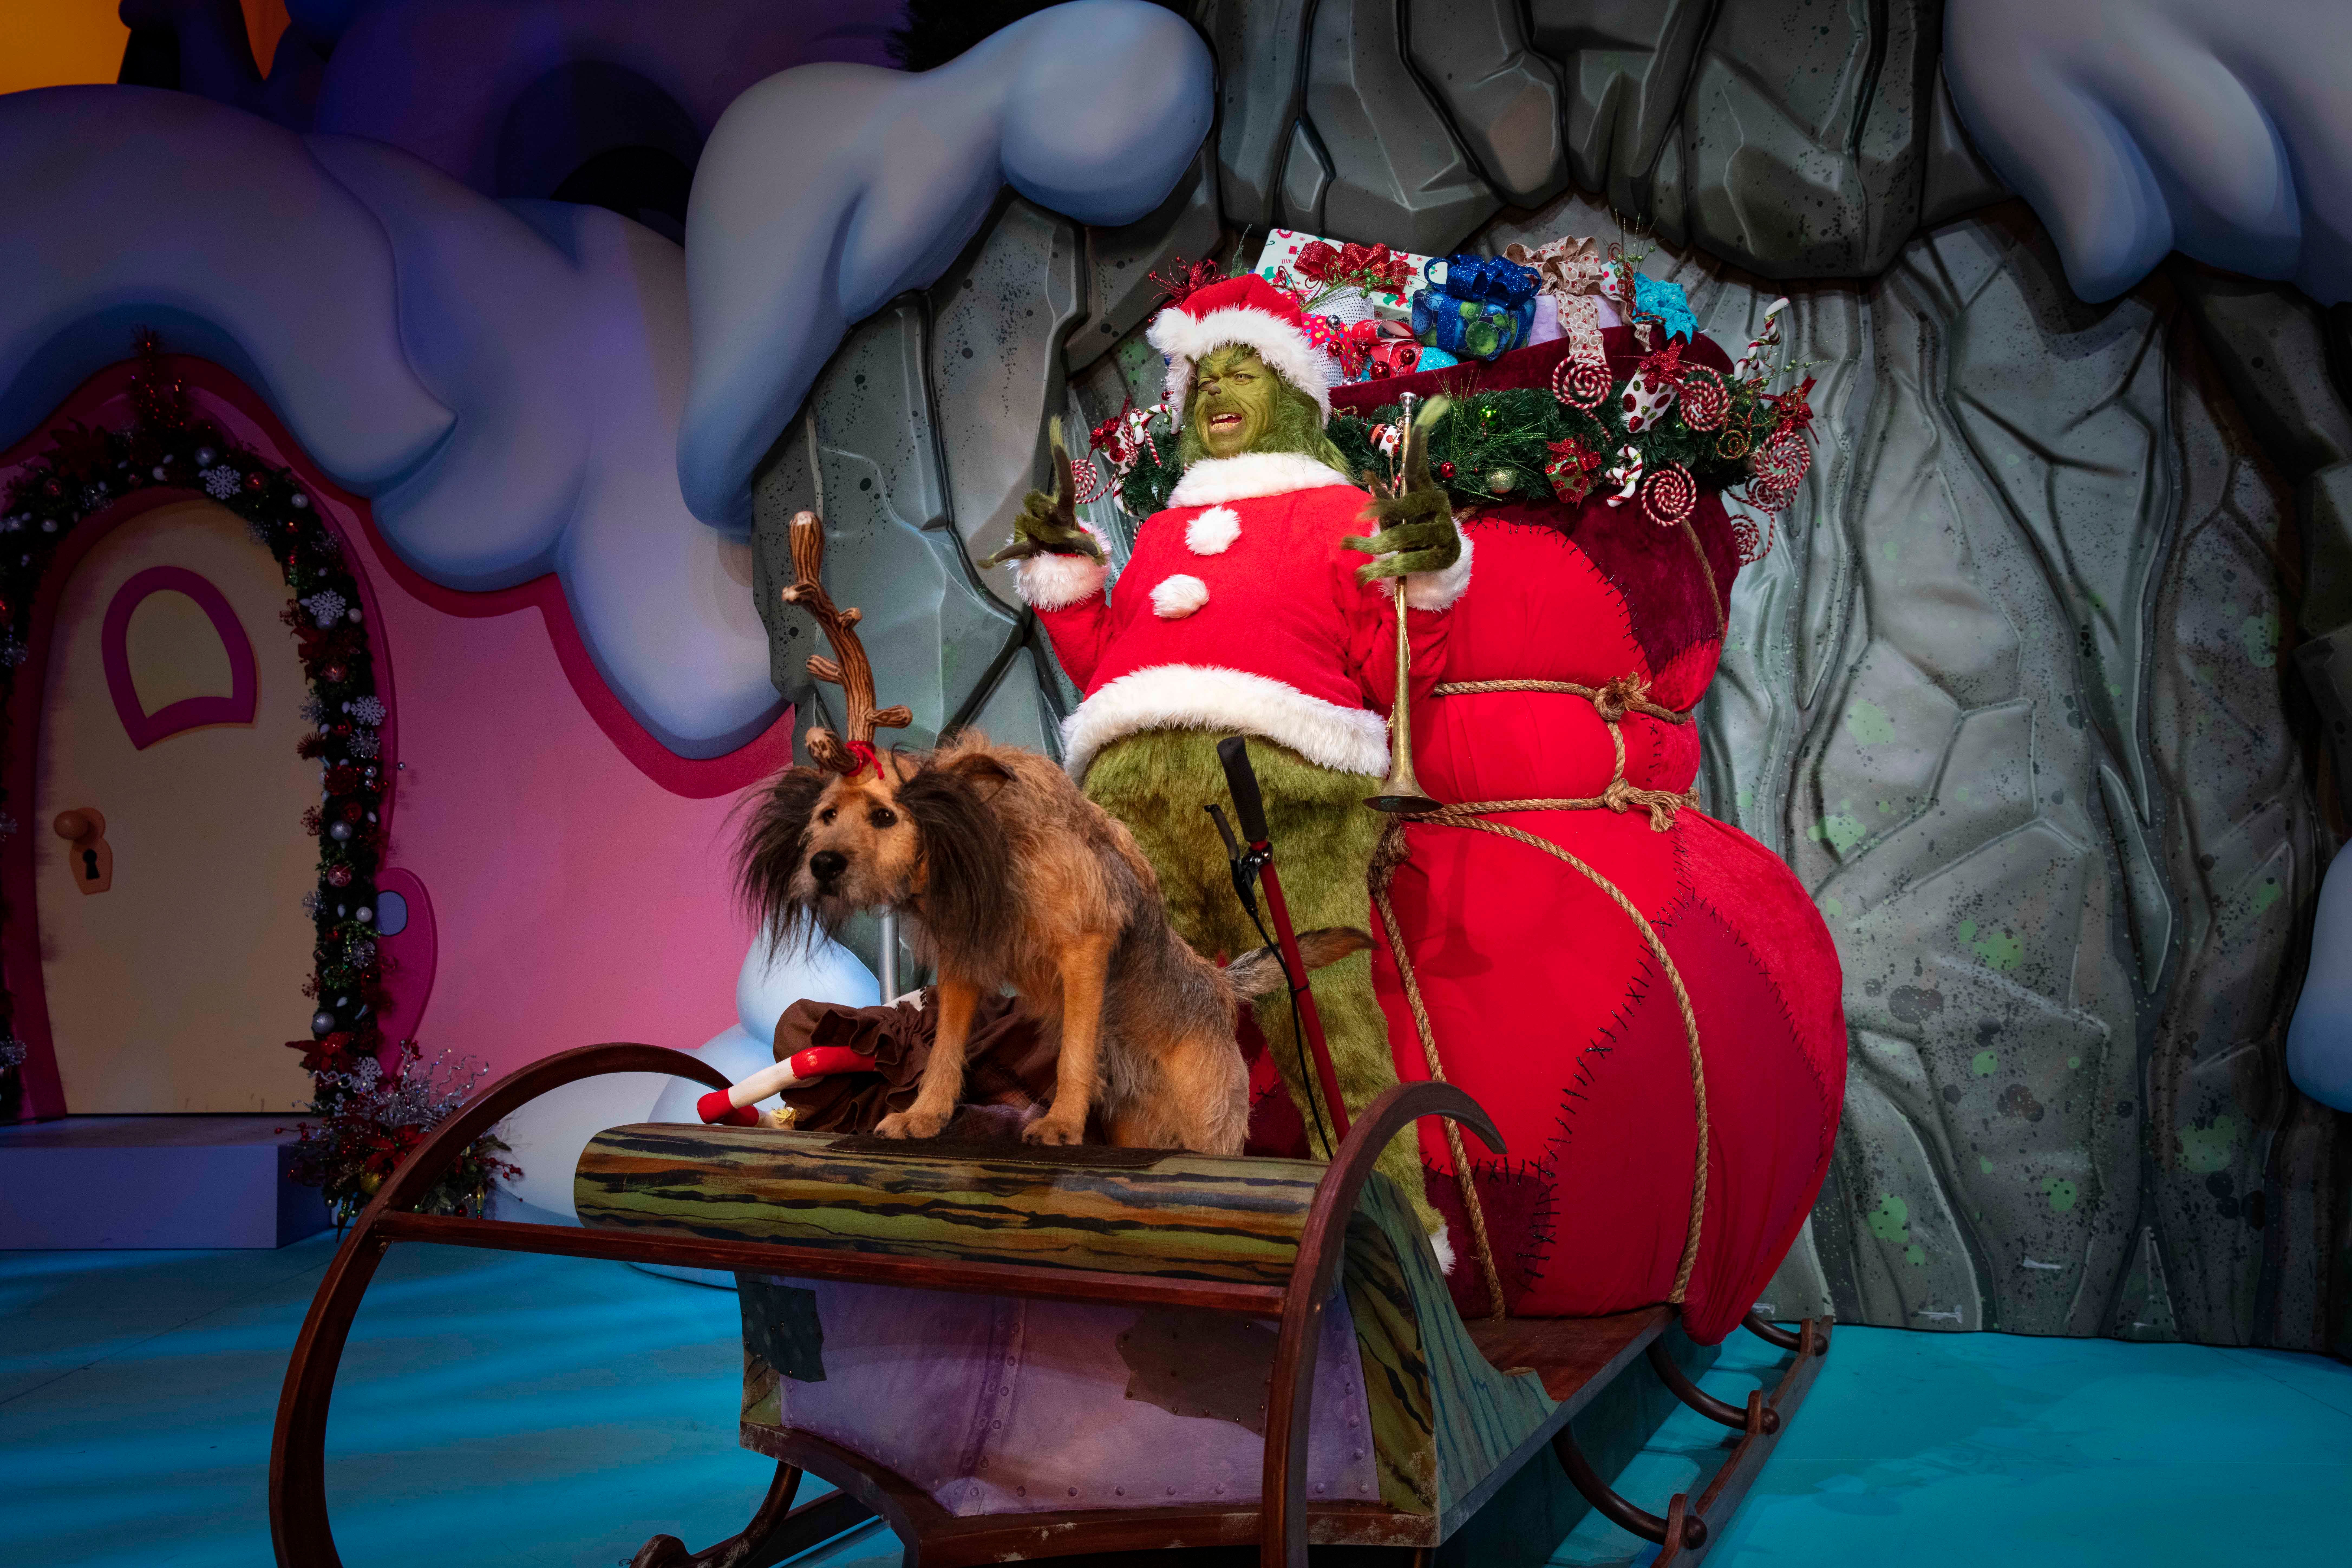 Don't miss the Grinchmas show at Seuss Landing. (Photo courtesy of Universal Orlando)